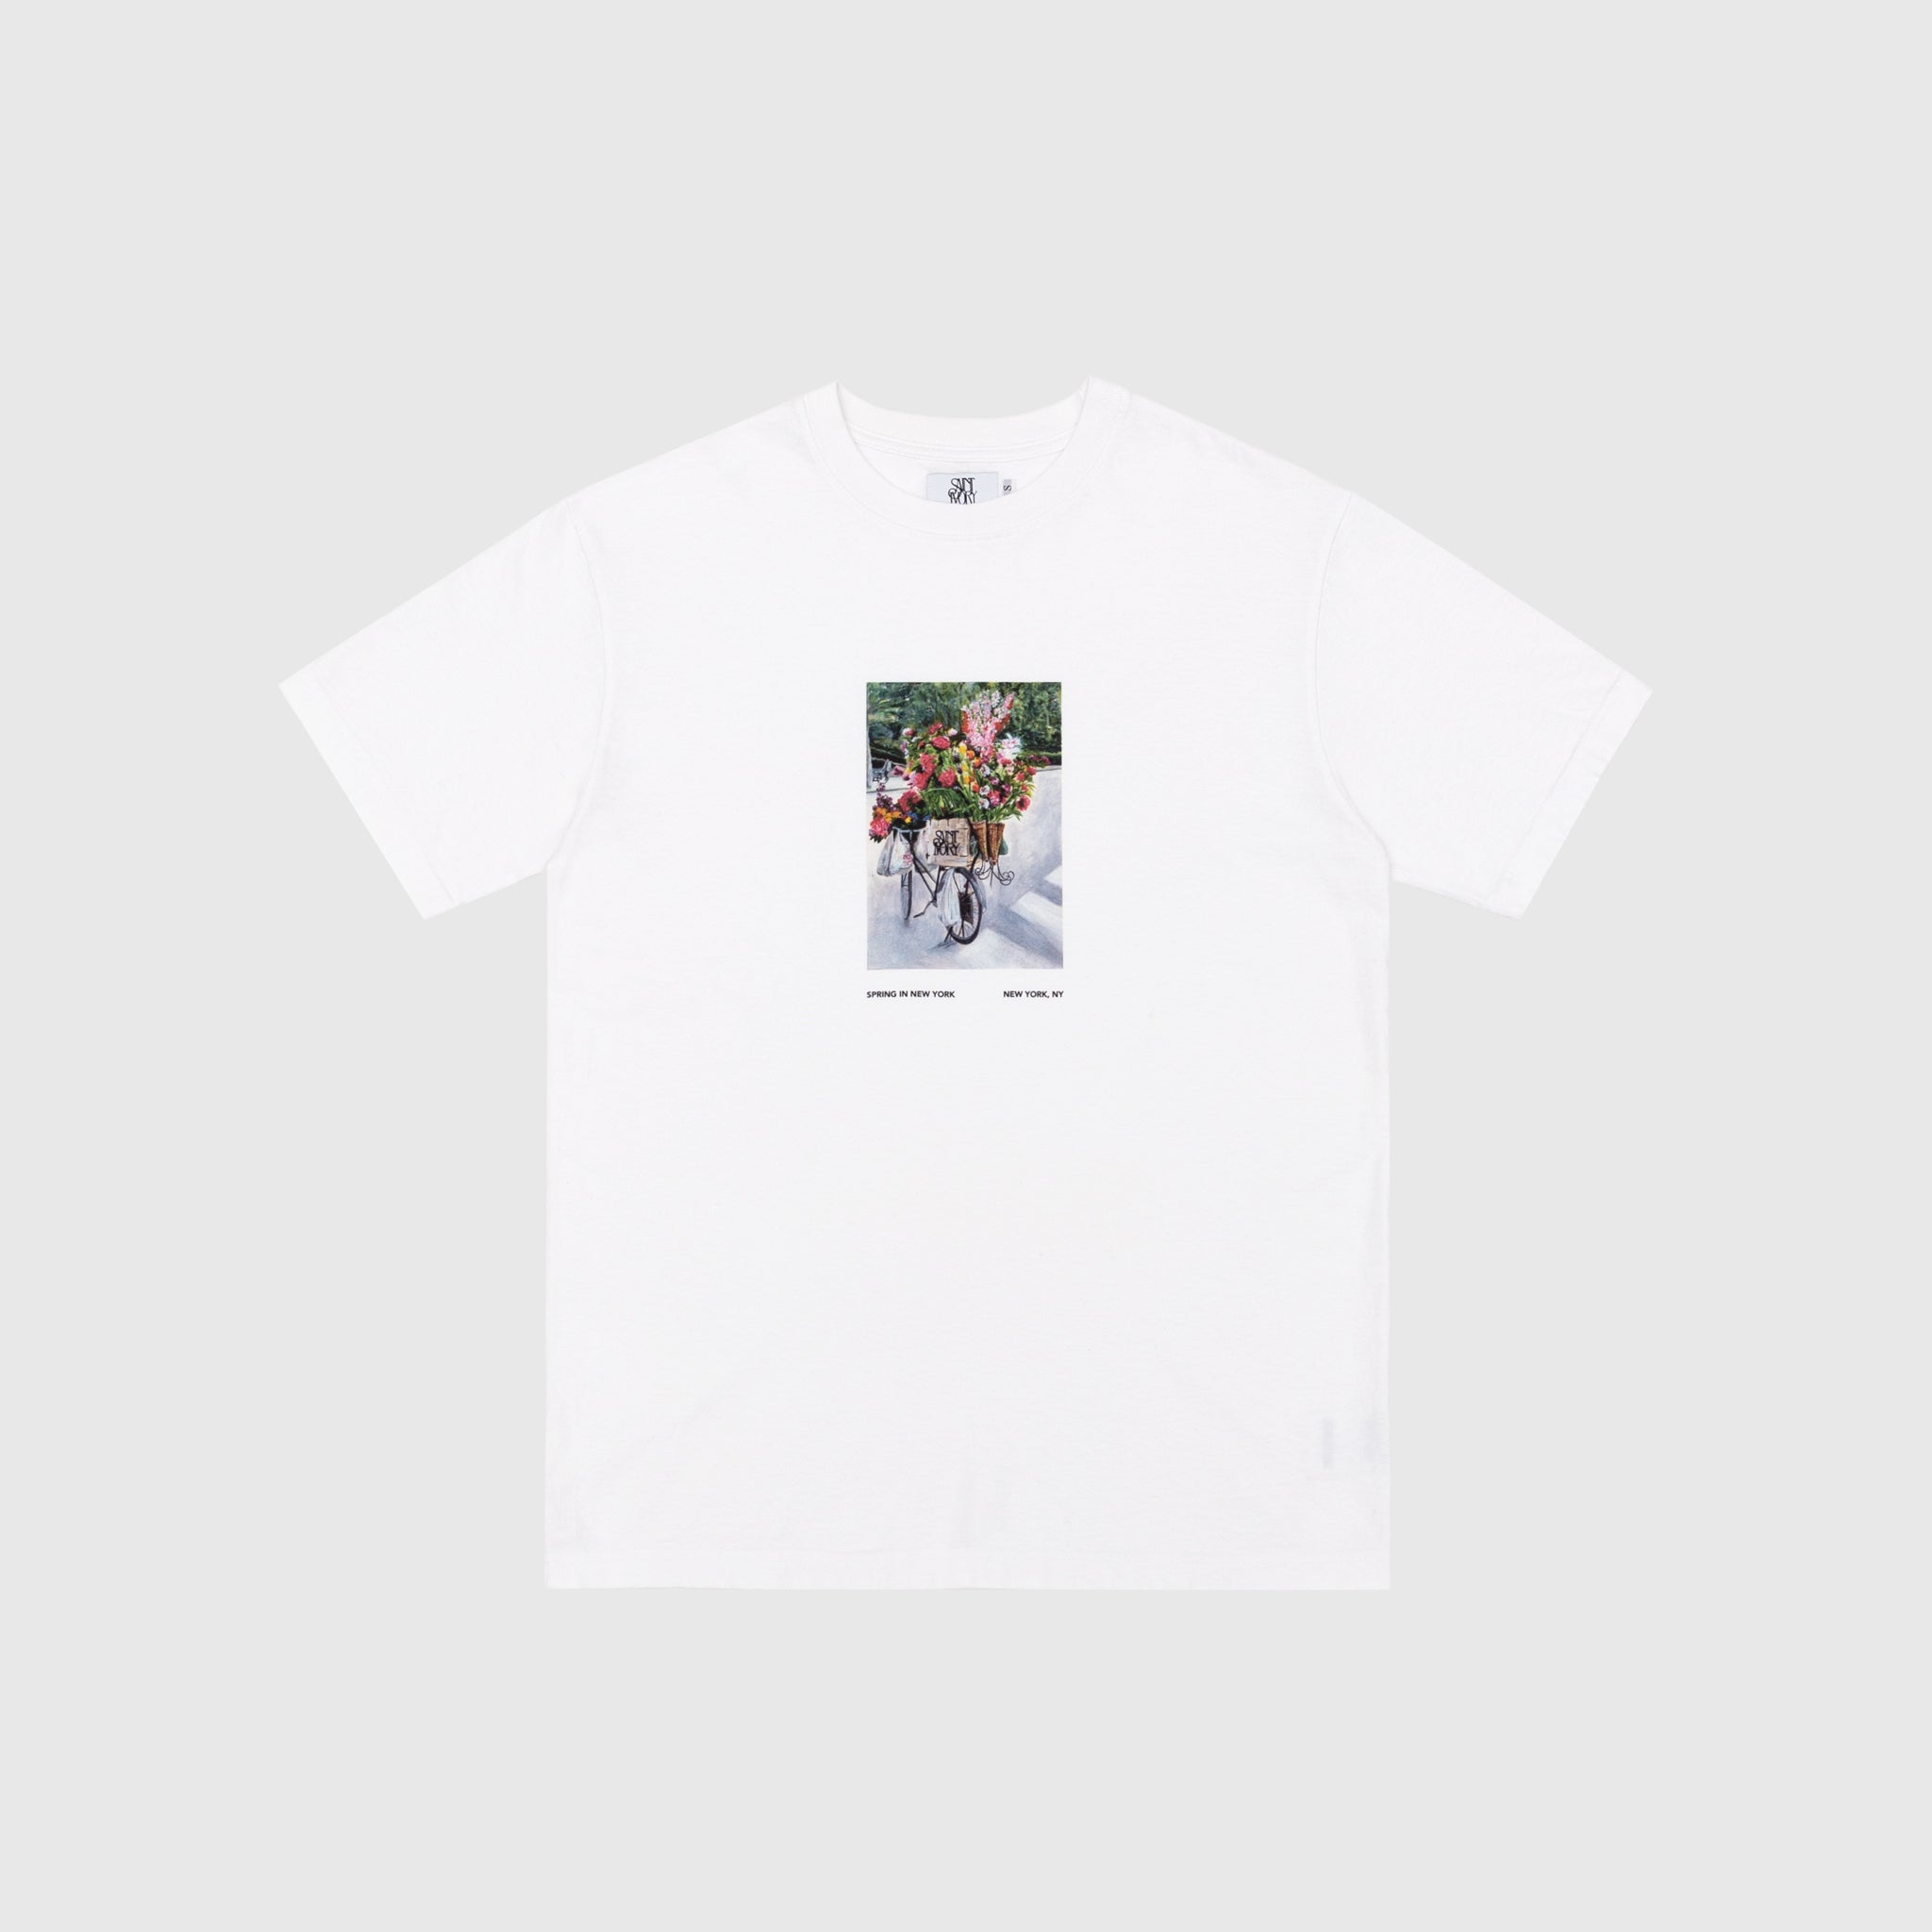 SPRING IN NEW YORK S/S T-SHIRT